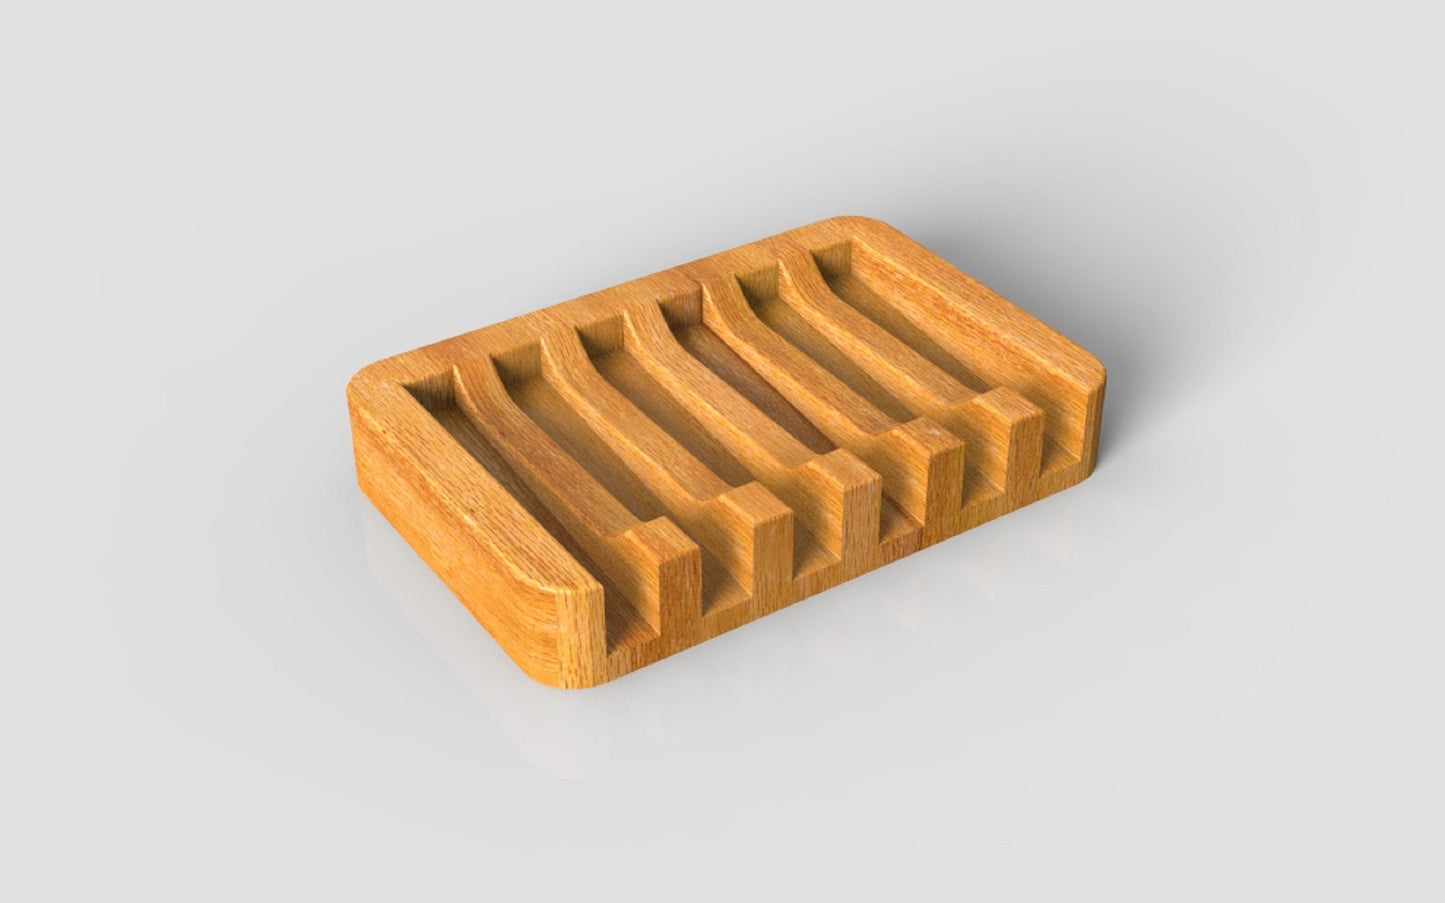 Soap Dish Wooden Tray - Waterfall - Bath Spa Sink - Home Decor - Wooden Platter